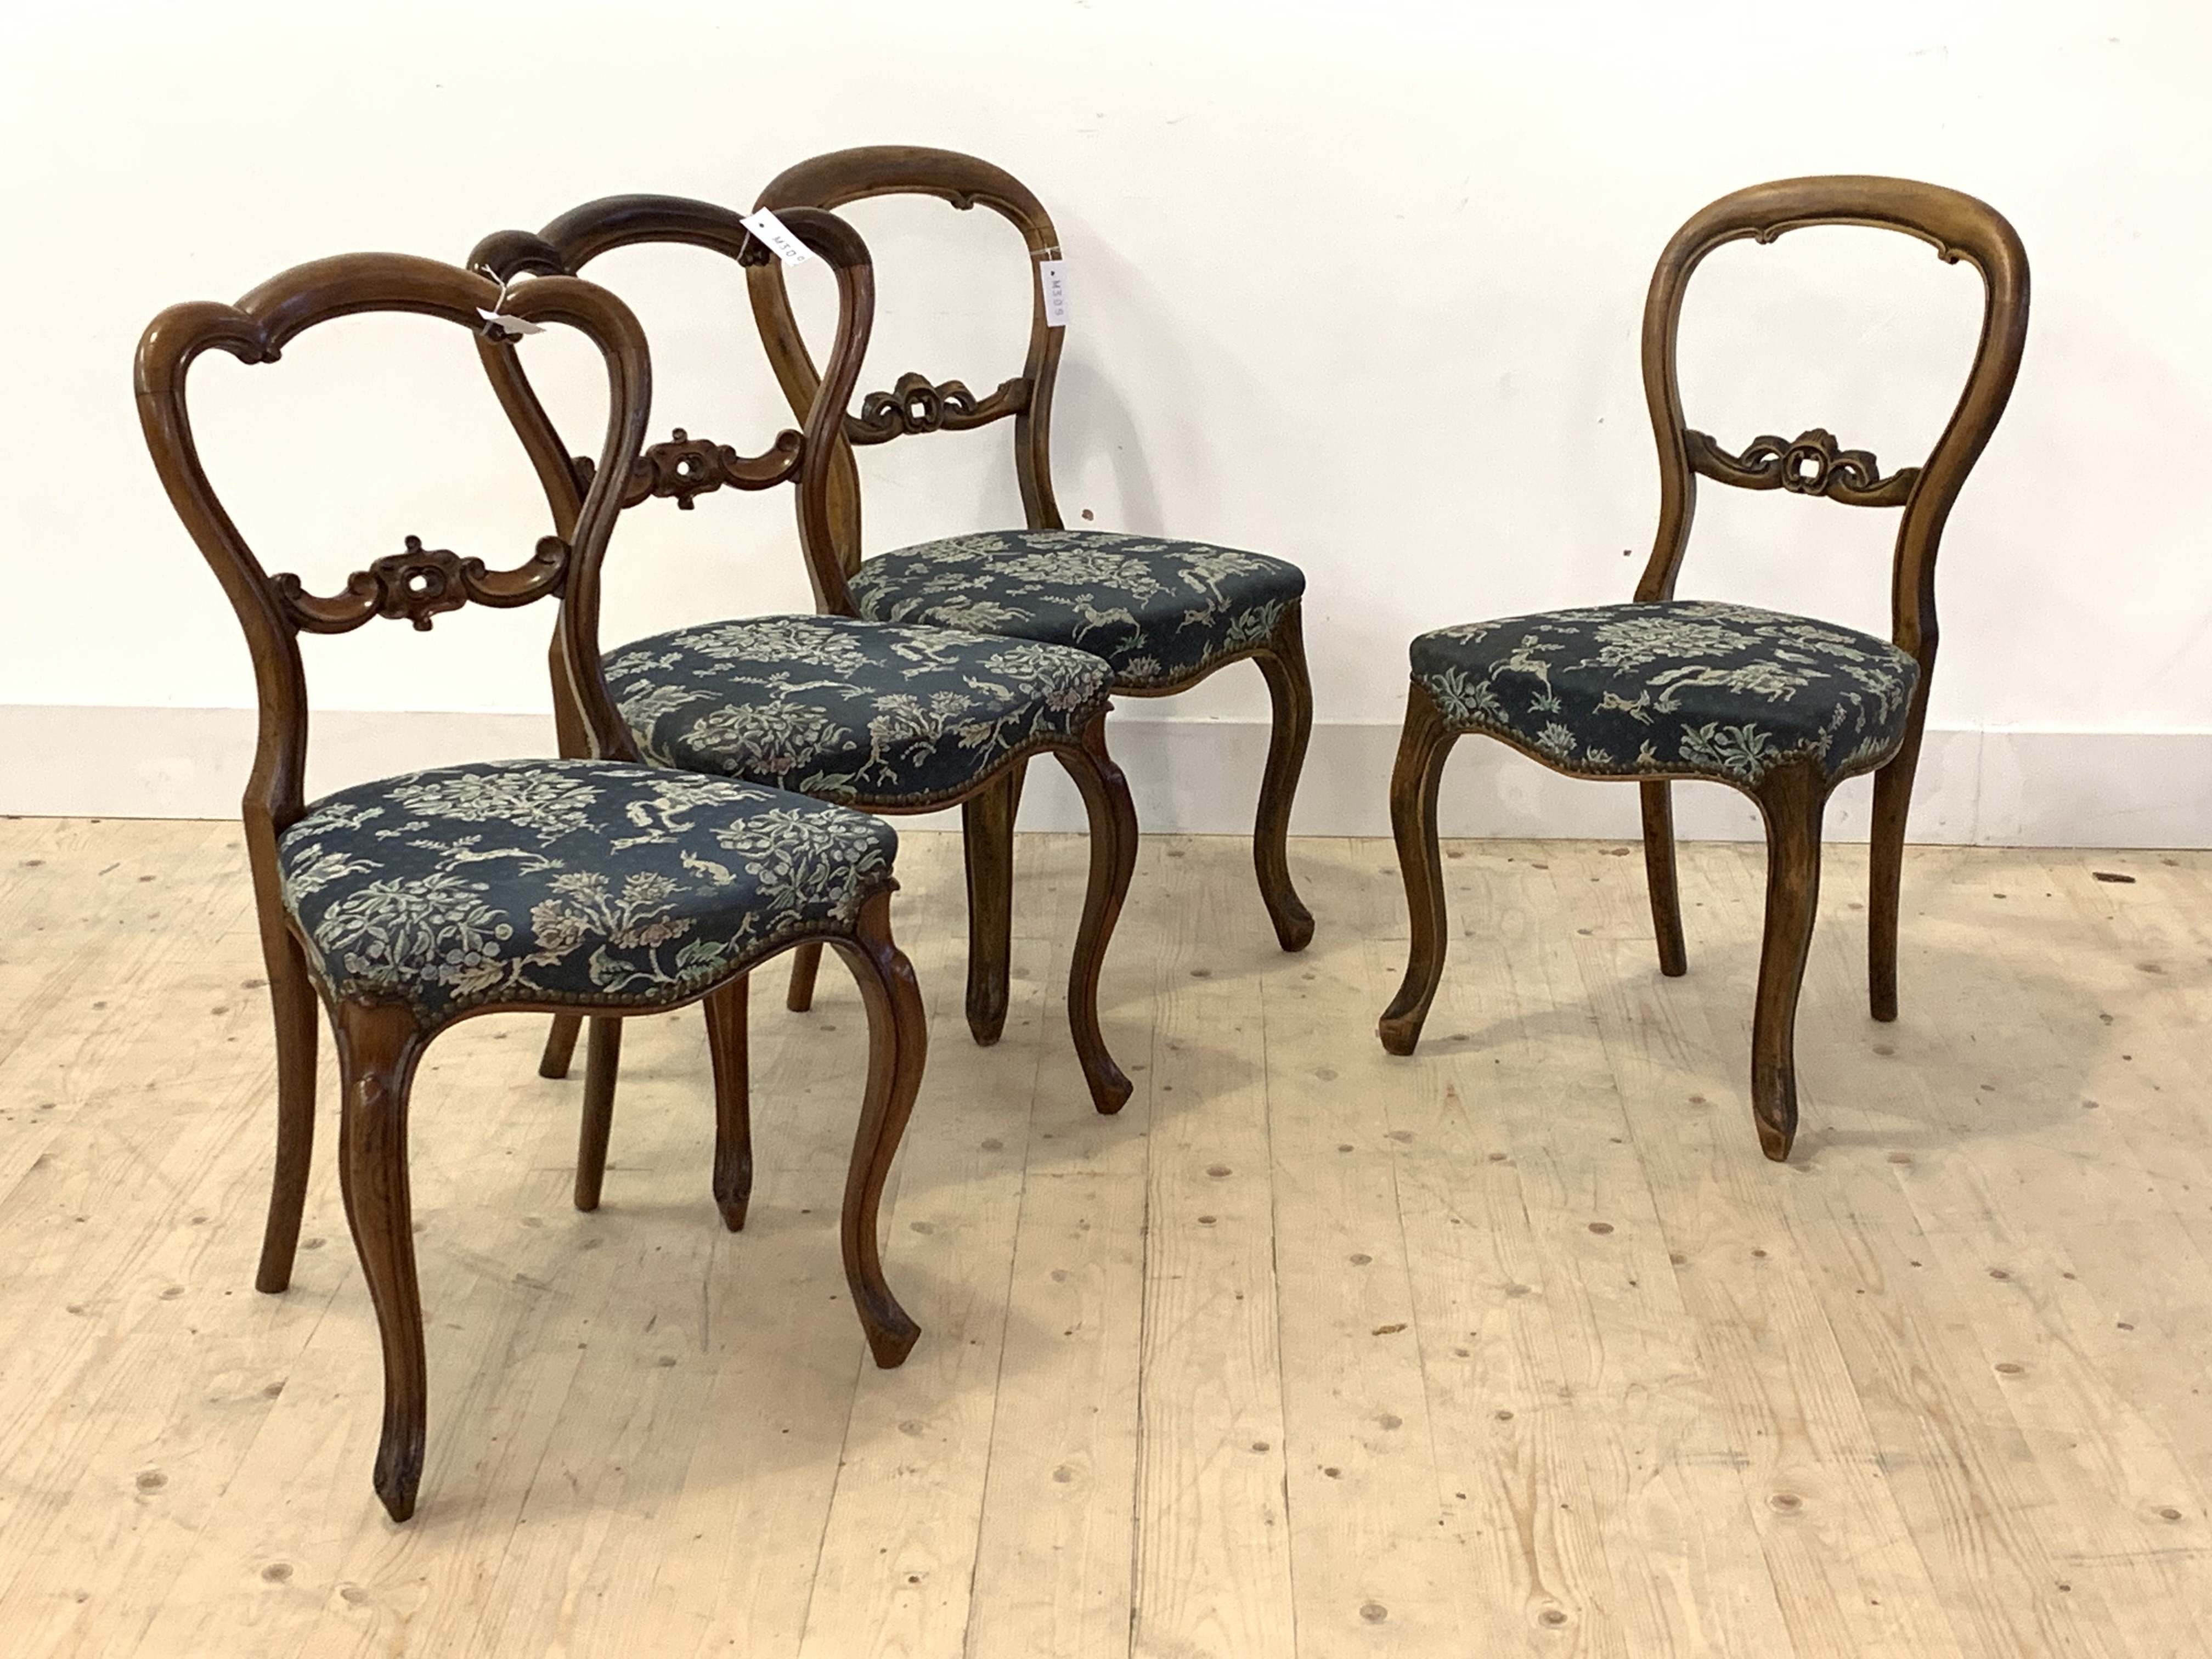 A harlequin set of four Victorian balloon back dining chairs, one pair in rosewood and the other